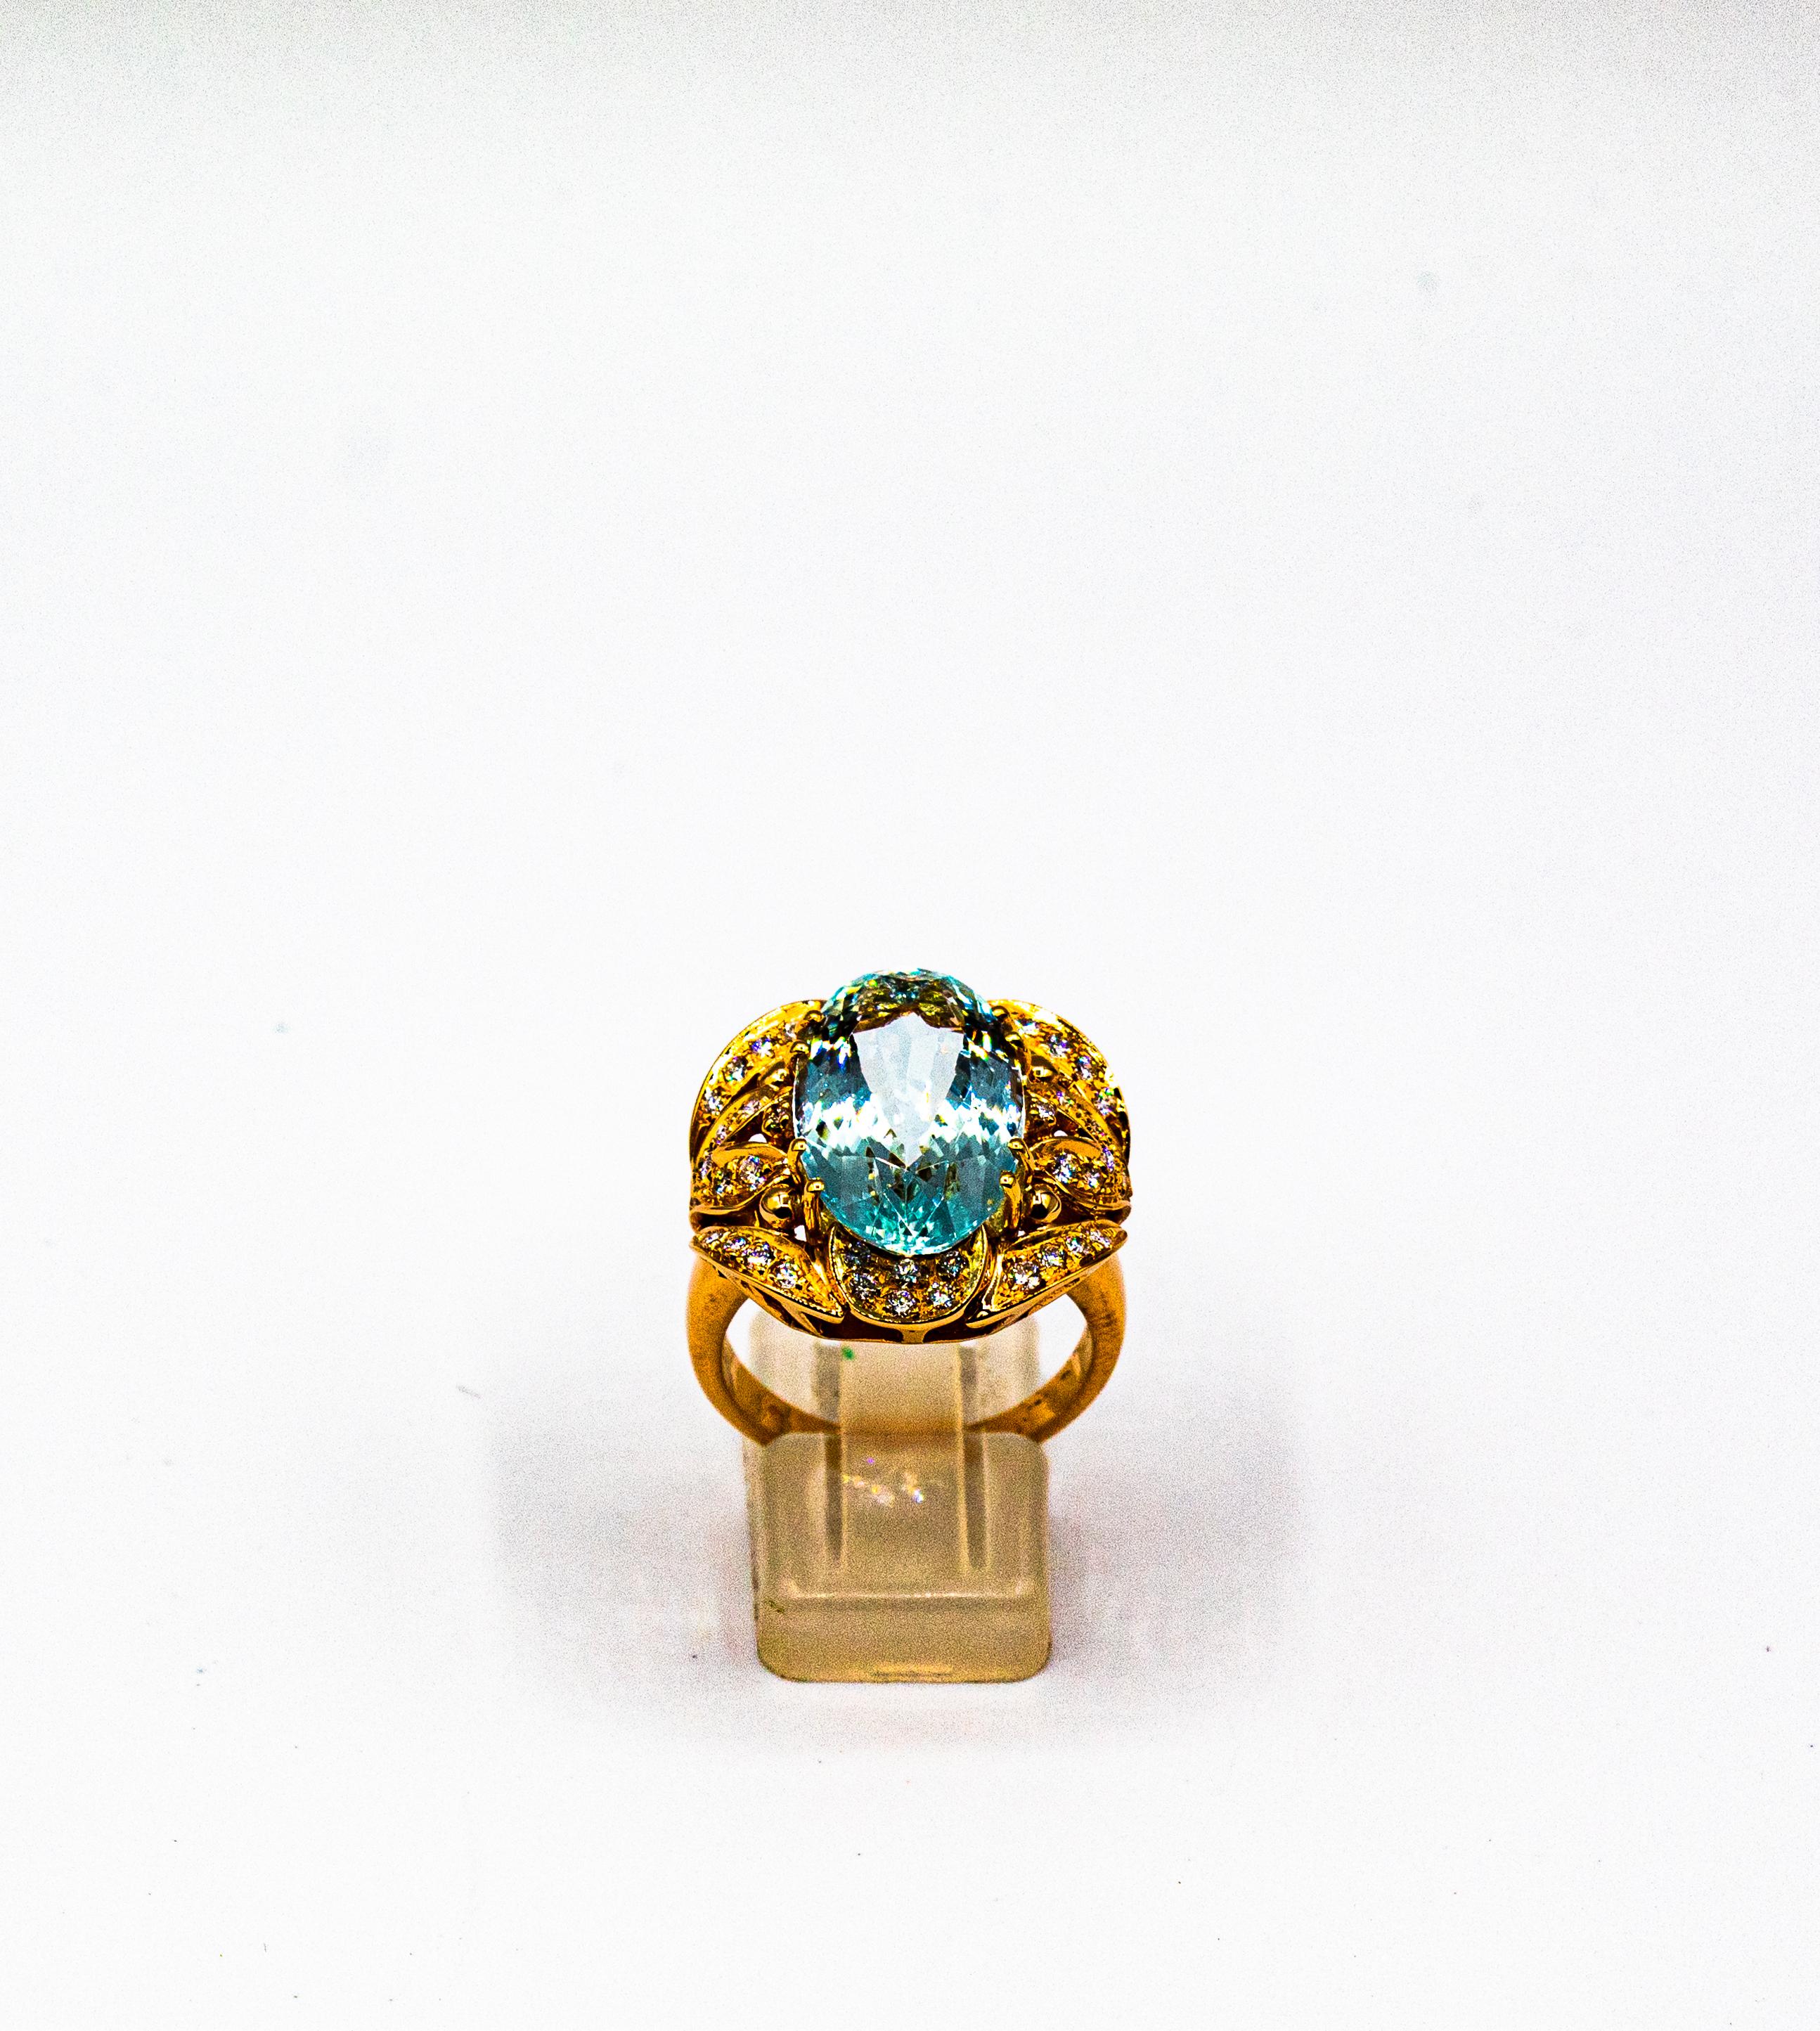 This Ring is made of 14K Yellow Gold.
This Ring has 0.55 Carats of White Brilliant Cut Diamonds.
This Ring has a 8.62 Carats Oval Cut Natural Aquamarine.

Size ITA: 18 USA: 8 1/4

We're a workshop so every piece is handmade, customizable and